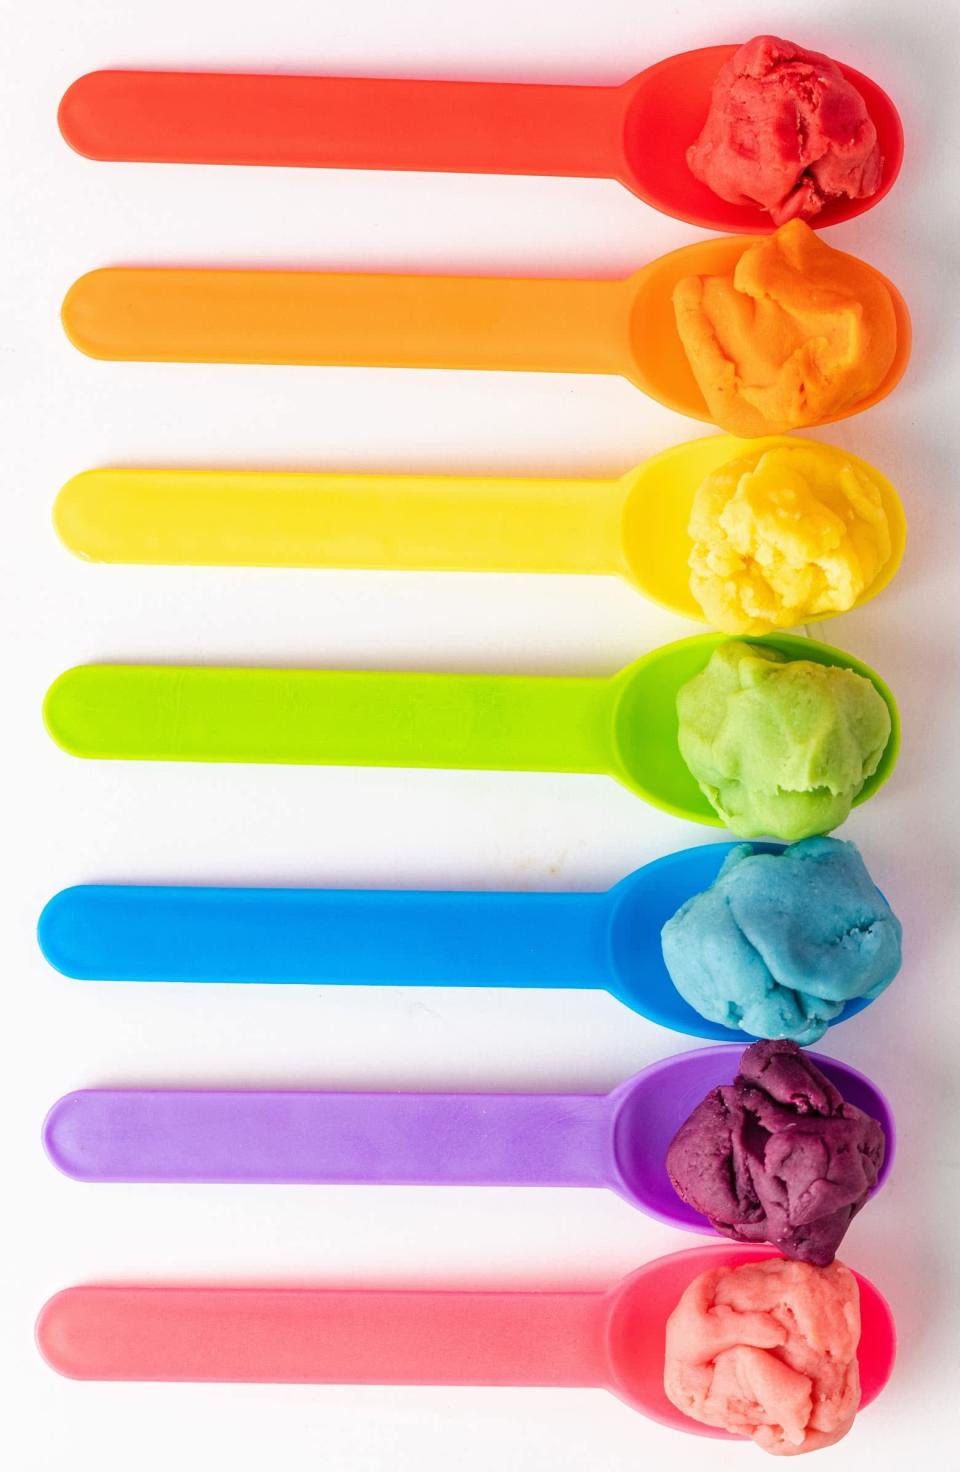 <p>Kids of all ages will be so excited to play with this <span>The Dough Project Rainbow Rolling Play Dough Set</span> ($48). There are so many fun things to create!</p>